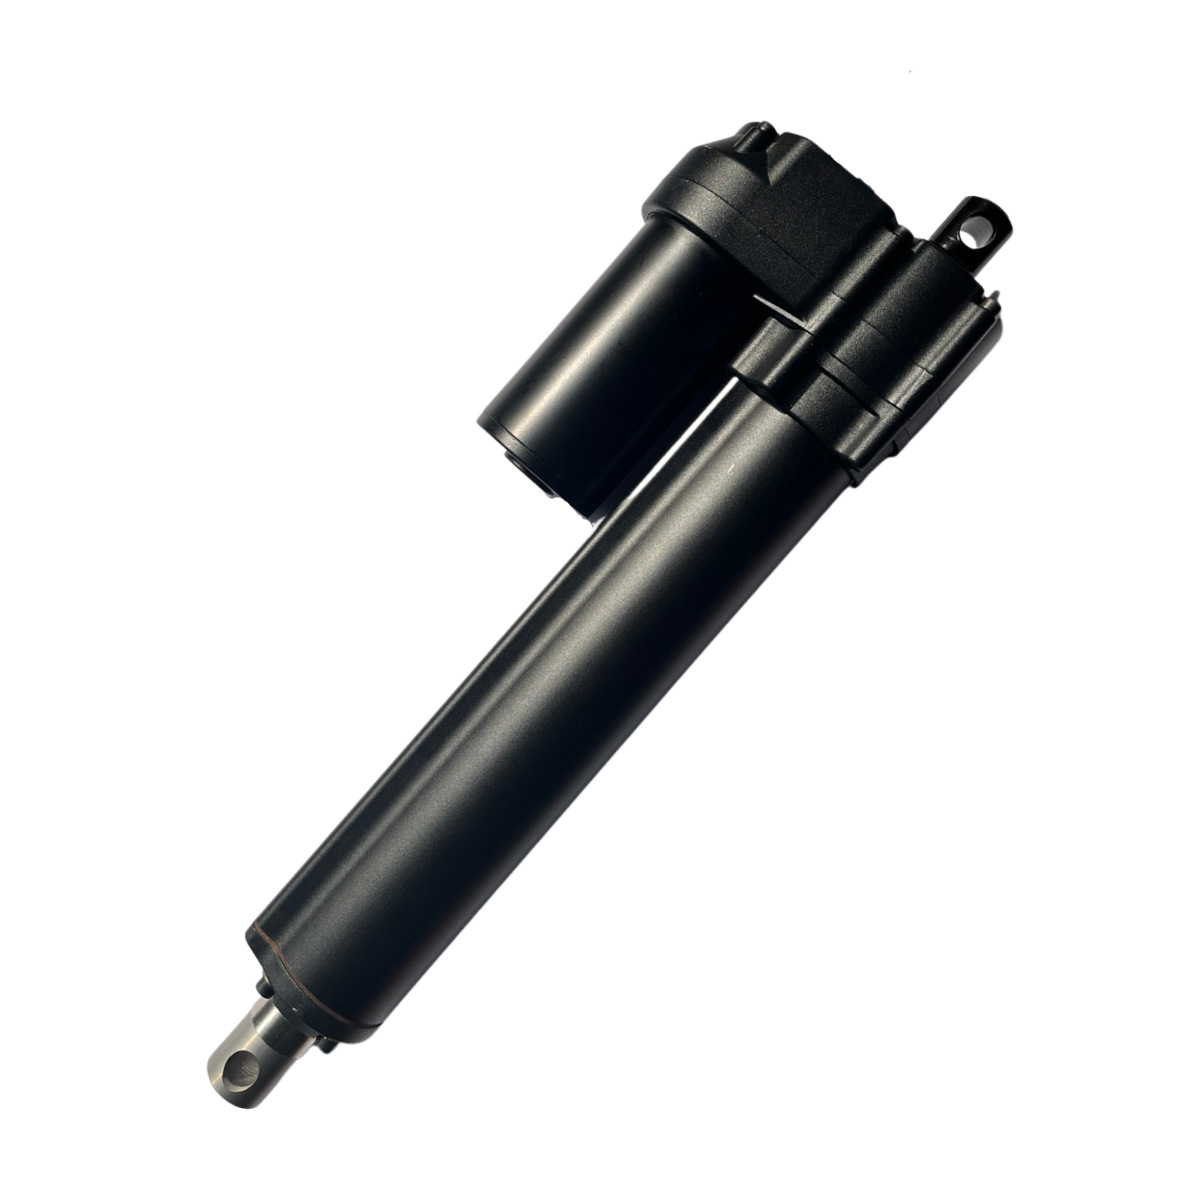 Aluminum Alloy Linear Actuator with Reed Switch Replace Cylinder Featured Image